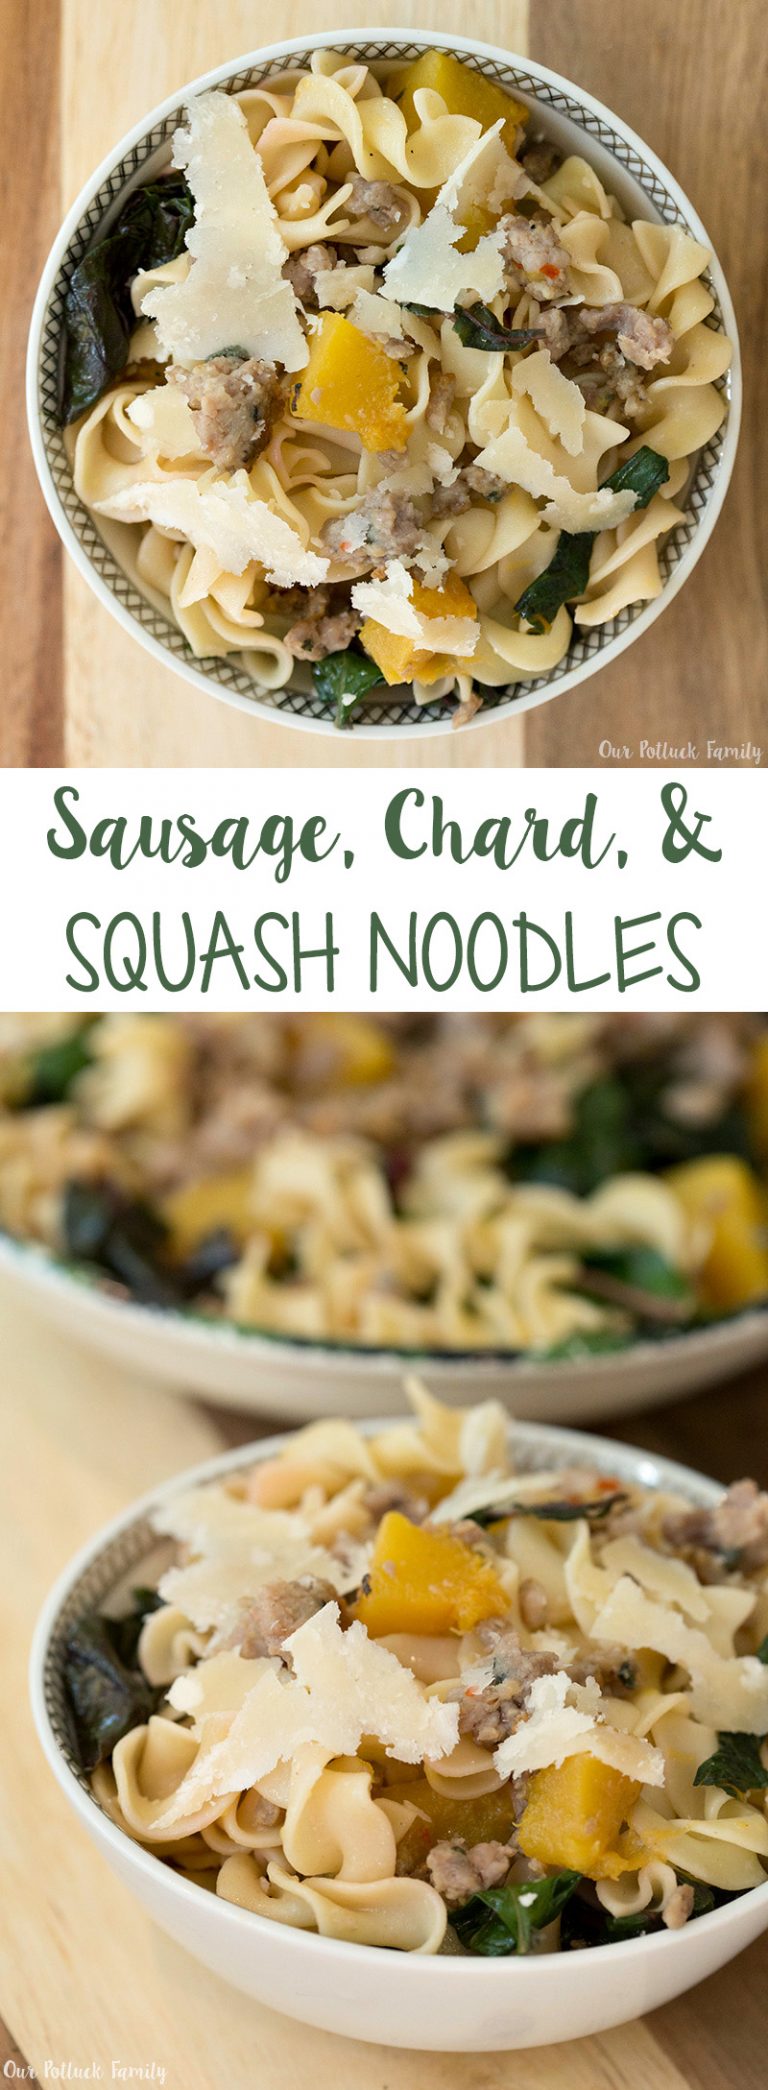 Sausage, Chard, and Acorn Squash Noodles - Our Potluck Family